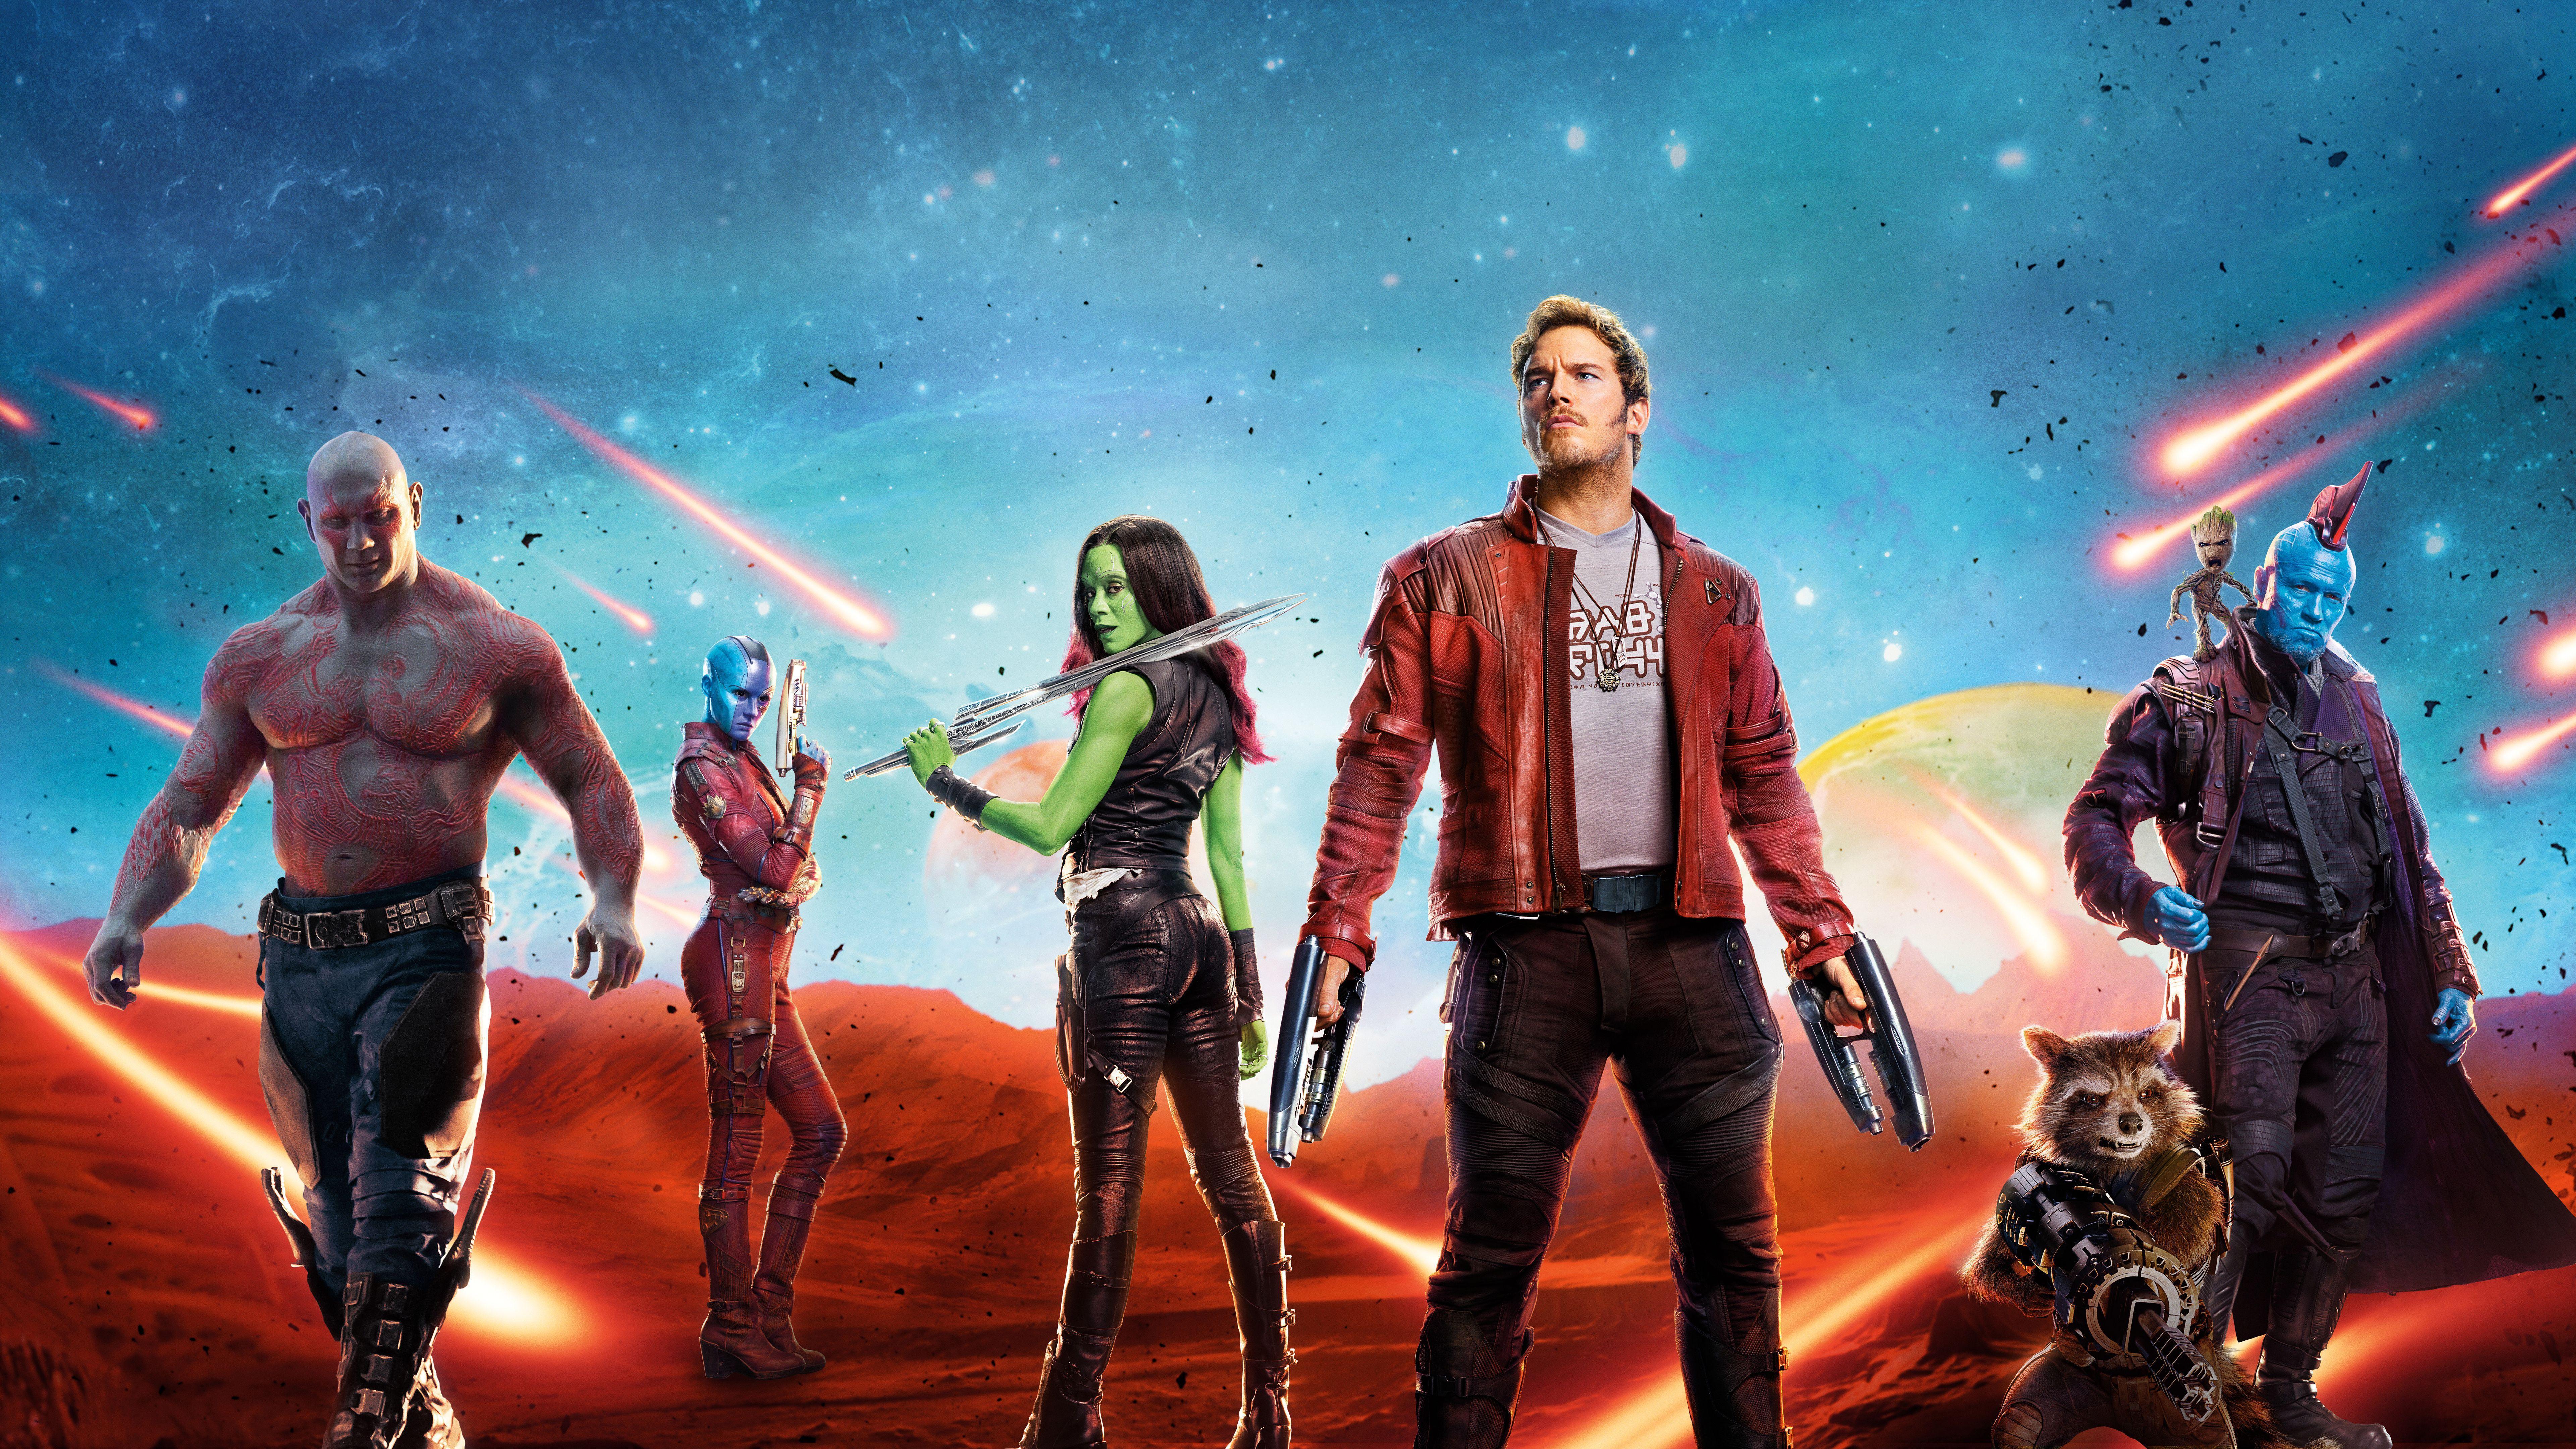 Guardians of the Galaxy 2 Wallpaper Free Guardians of the Galaxy 2 Background